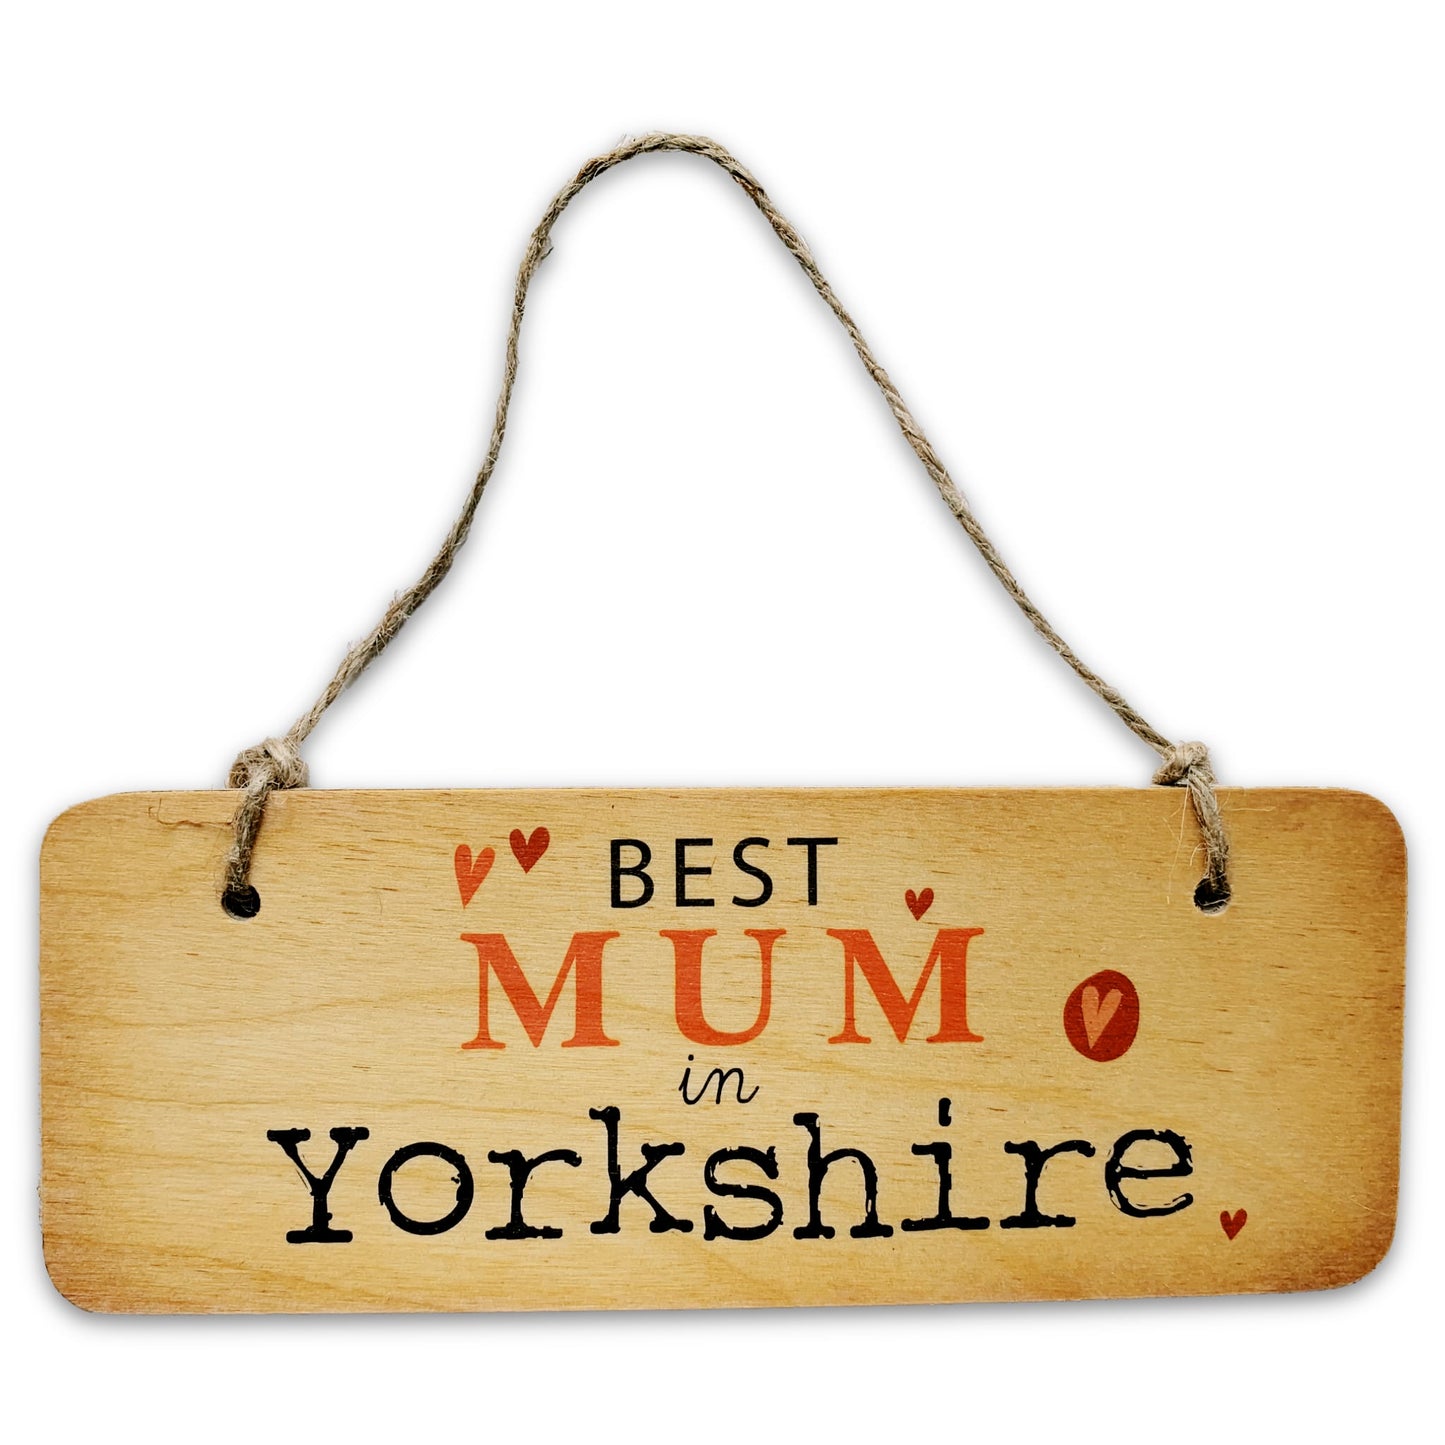 Best Mum in Yorkshire Rustic Wooden Sign - The Great Yorkshire Shop